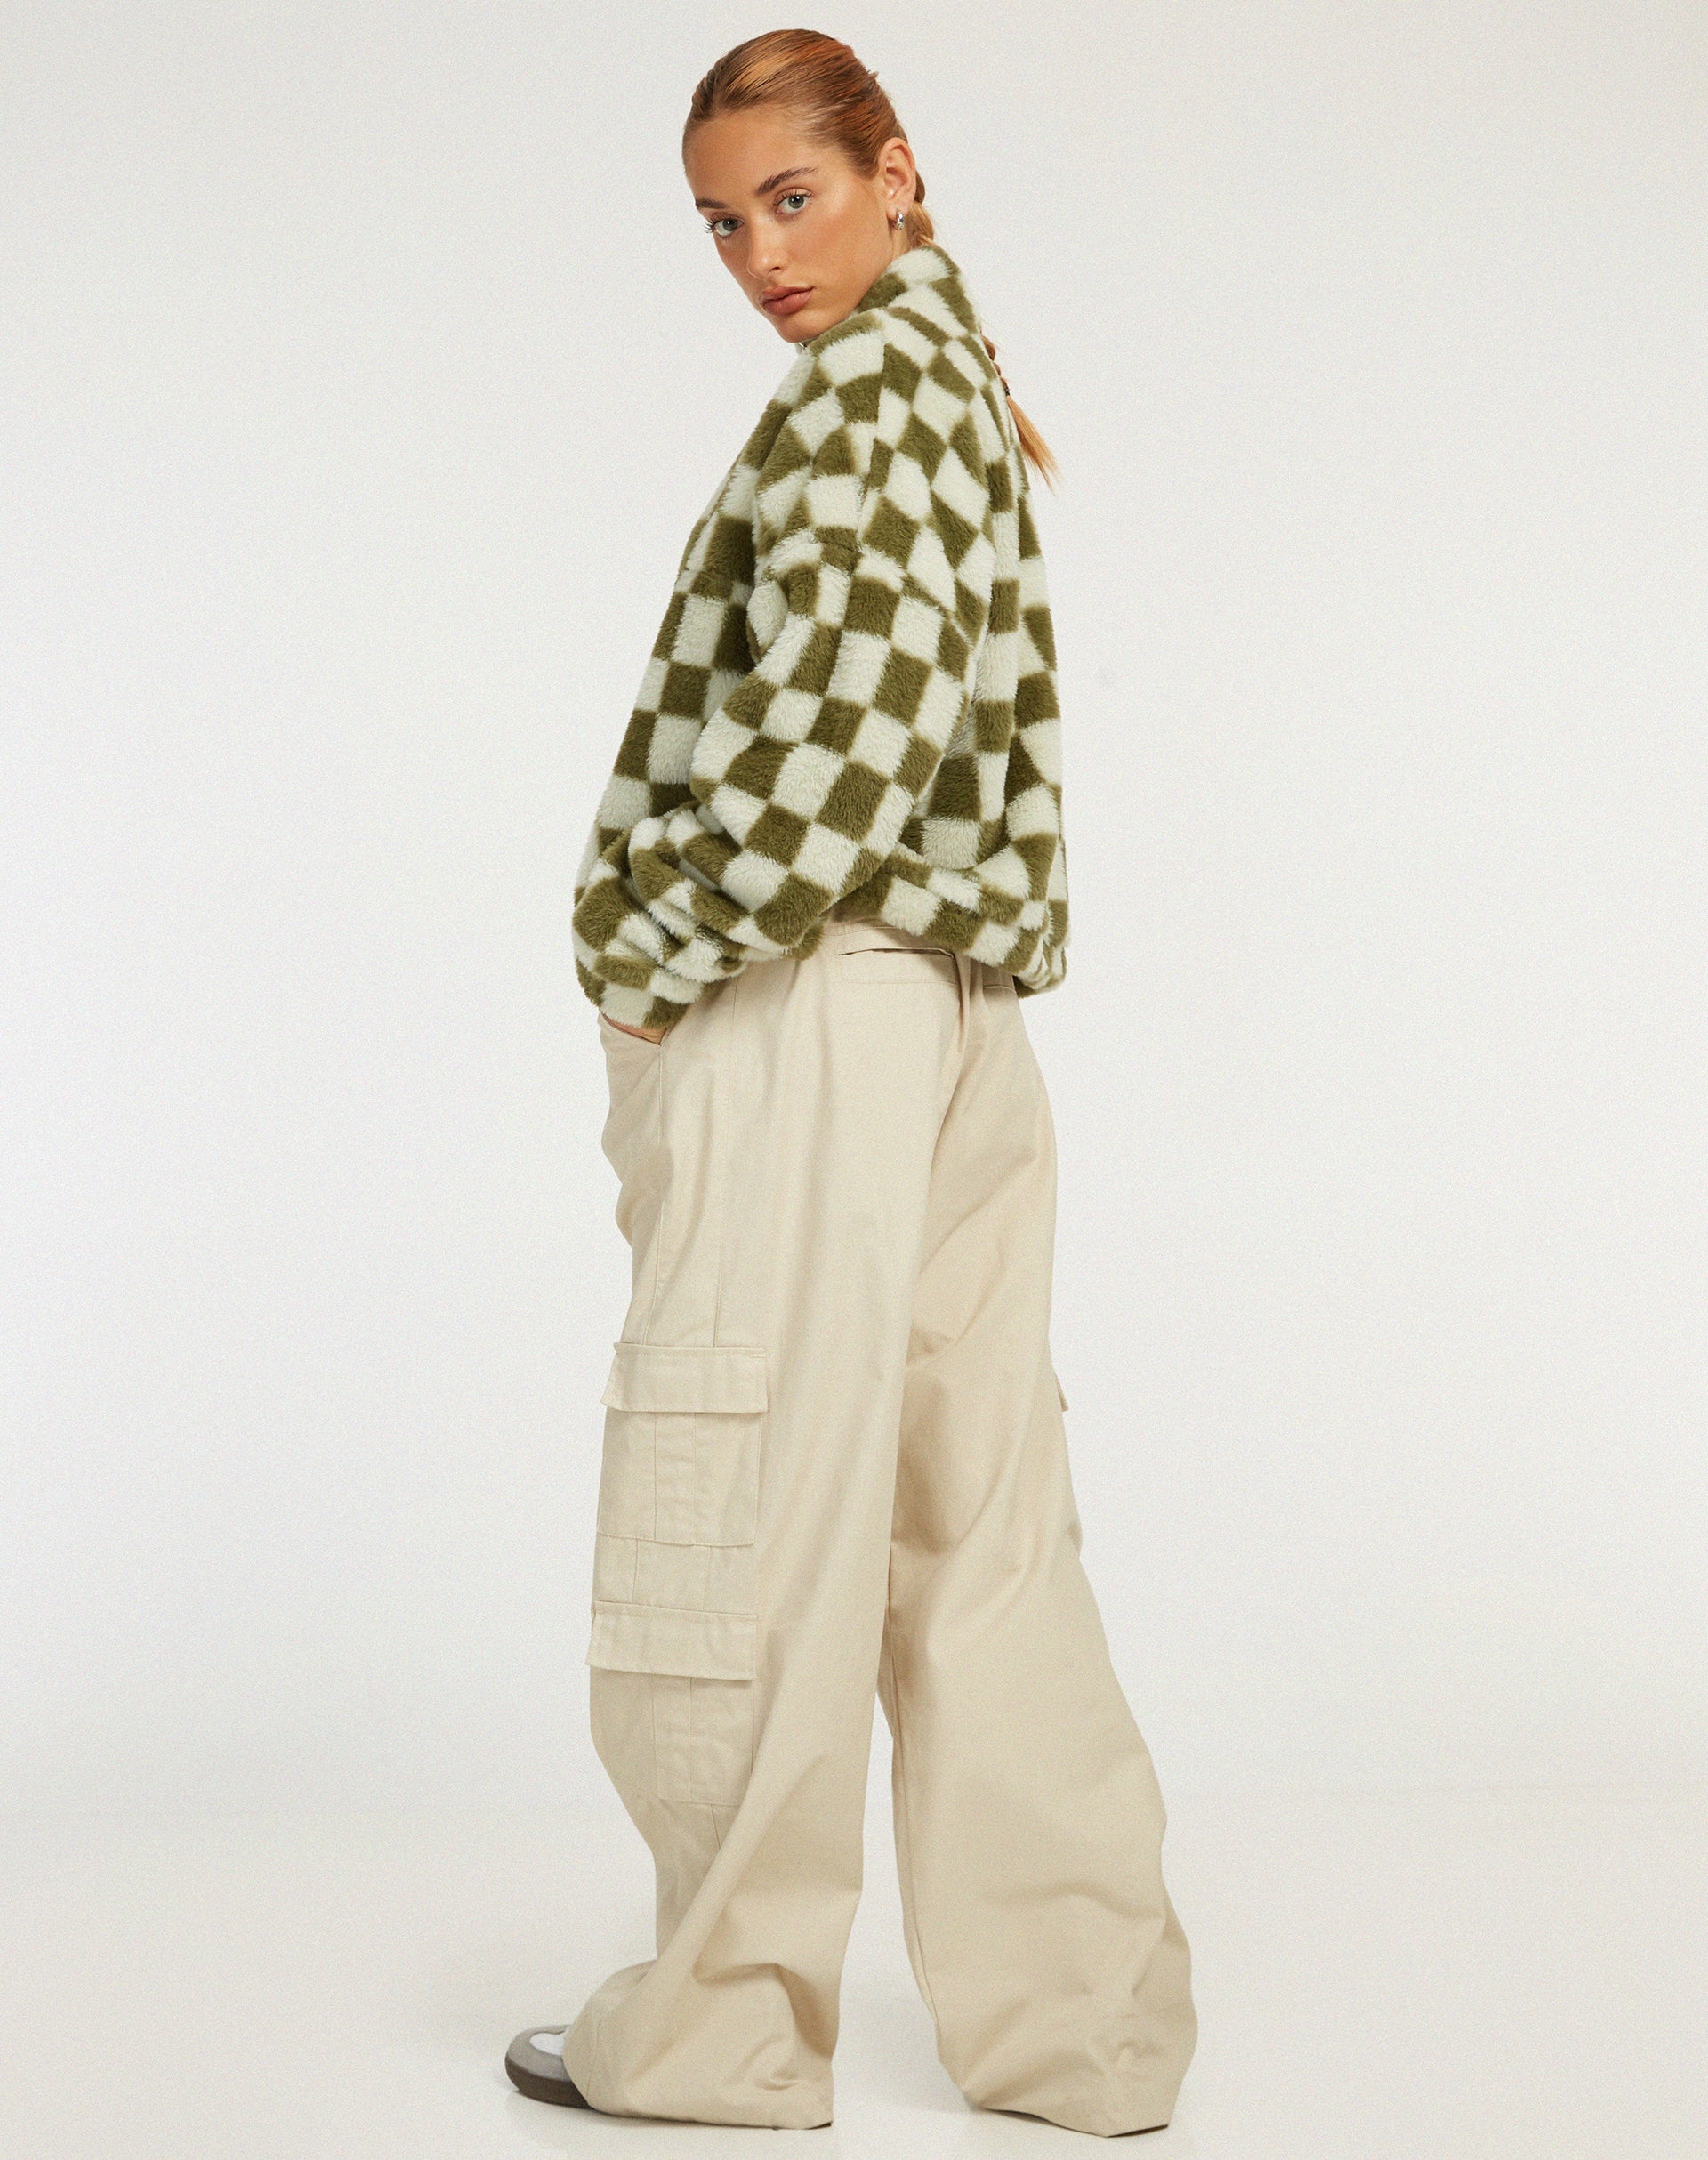 Image of Nero Jacket in Checkered Sage